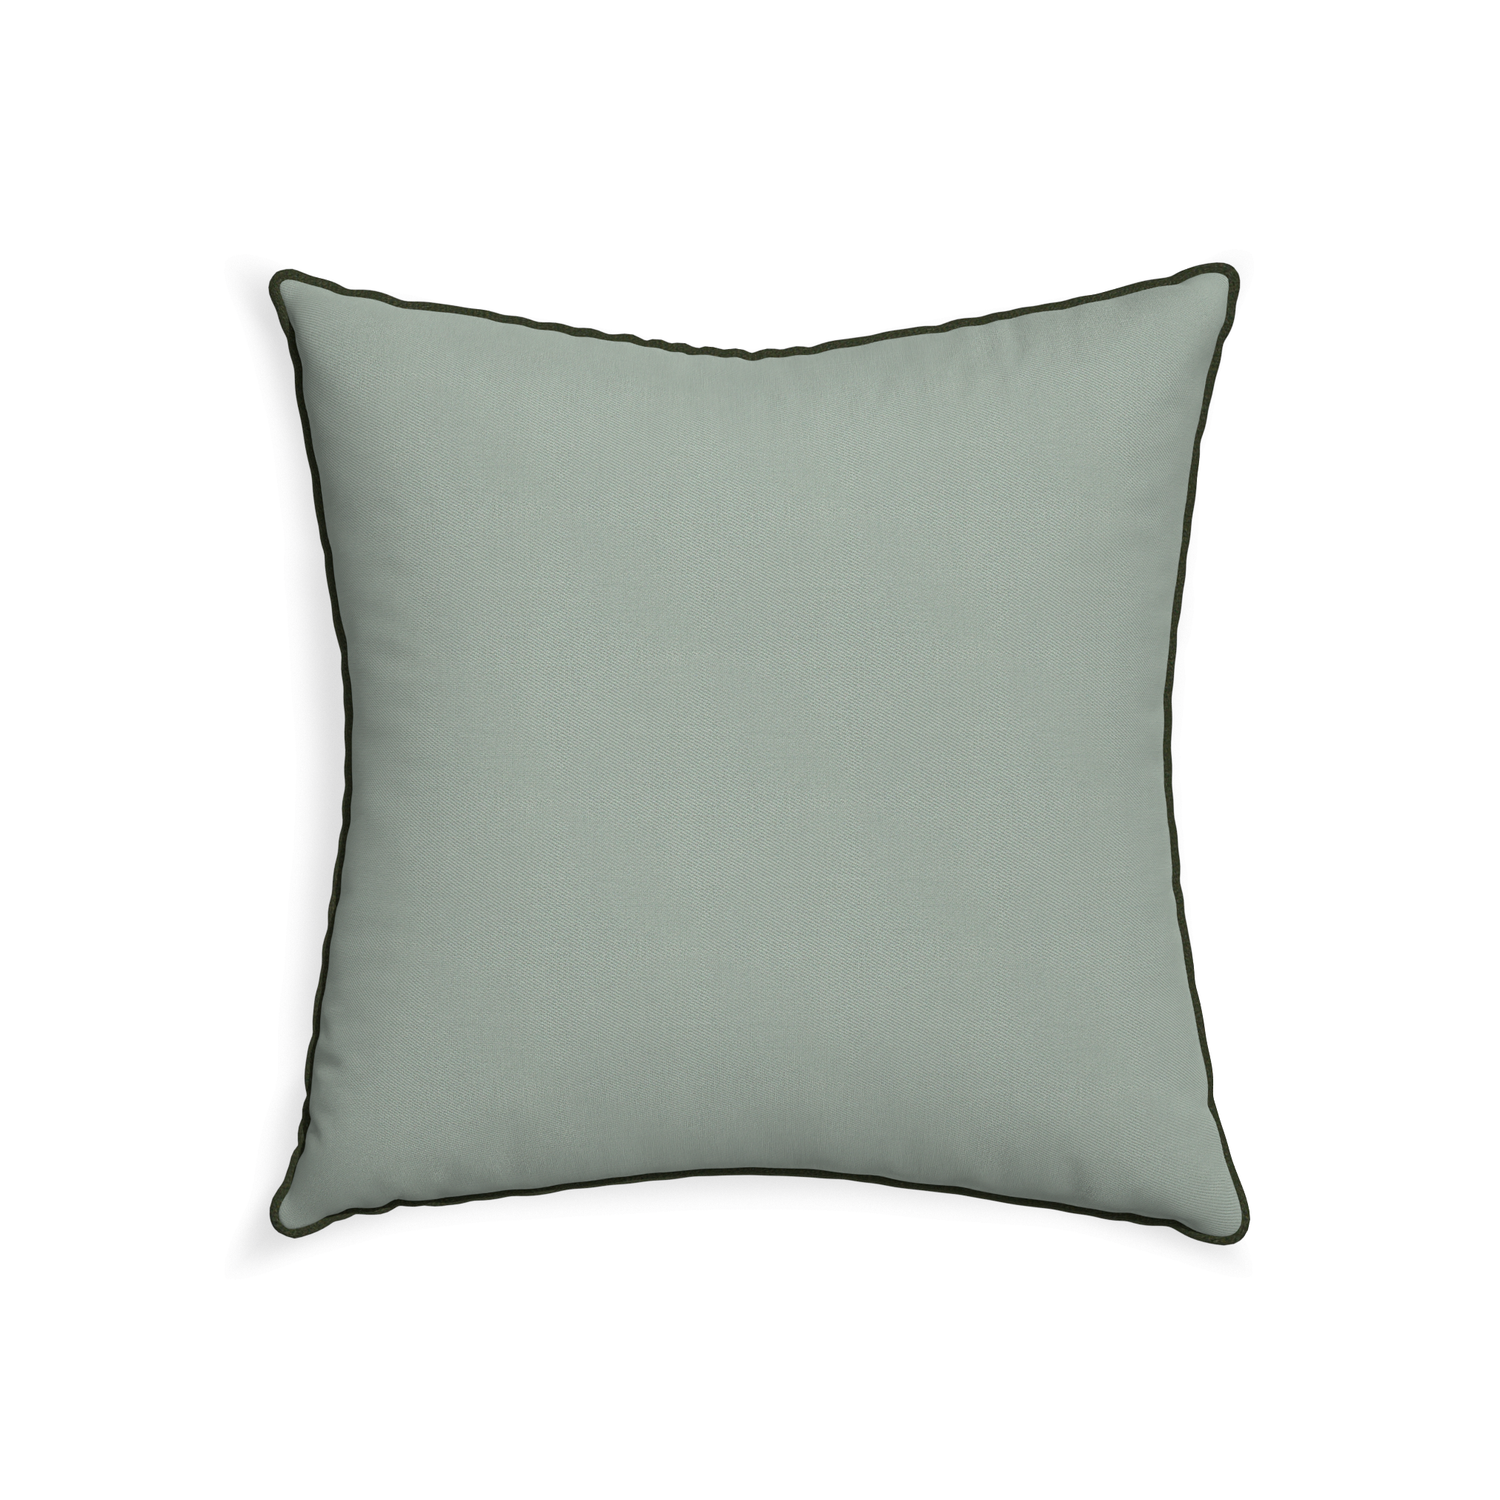 22-square sage custom sage green cottonpillow with f piping on white background